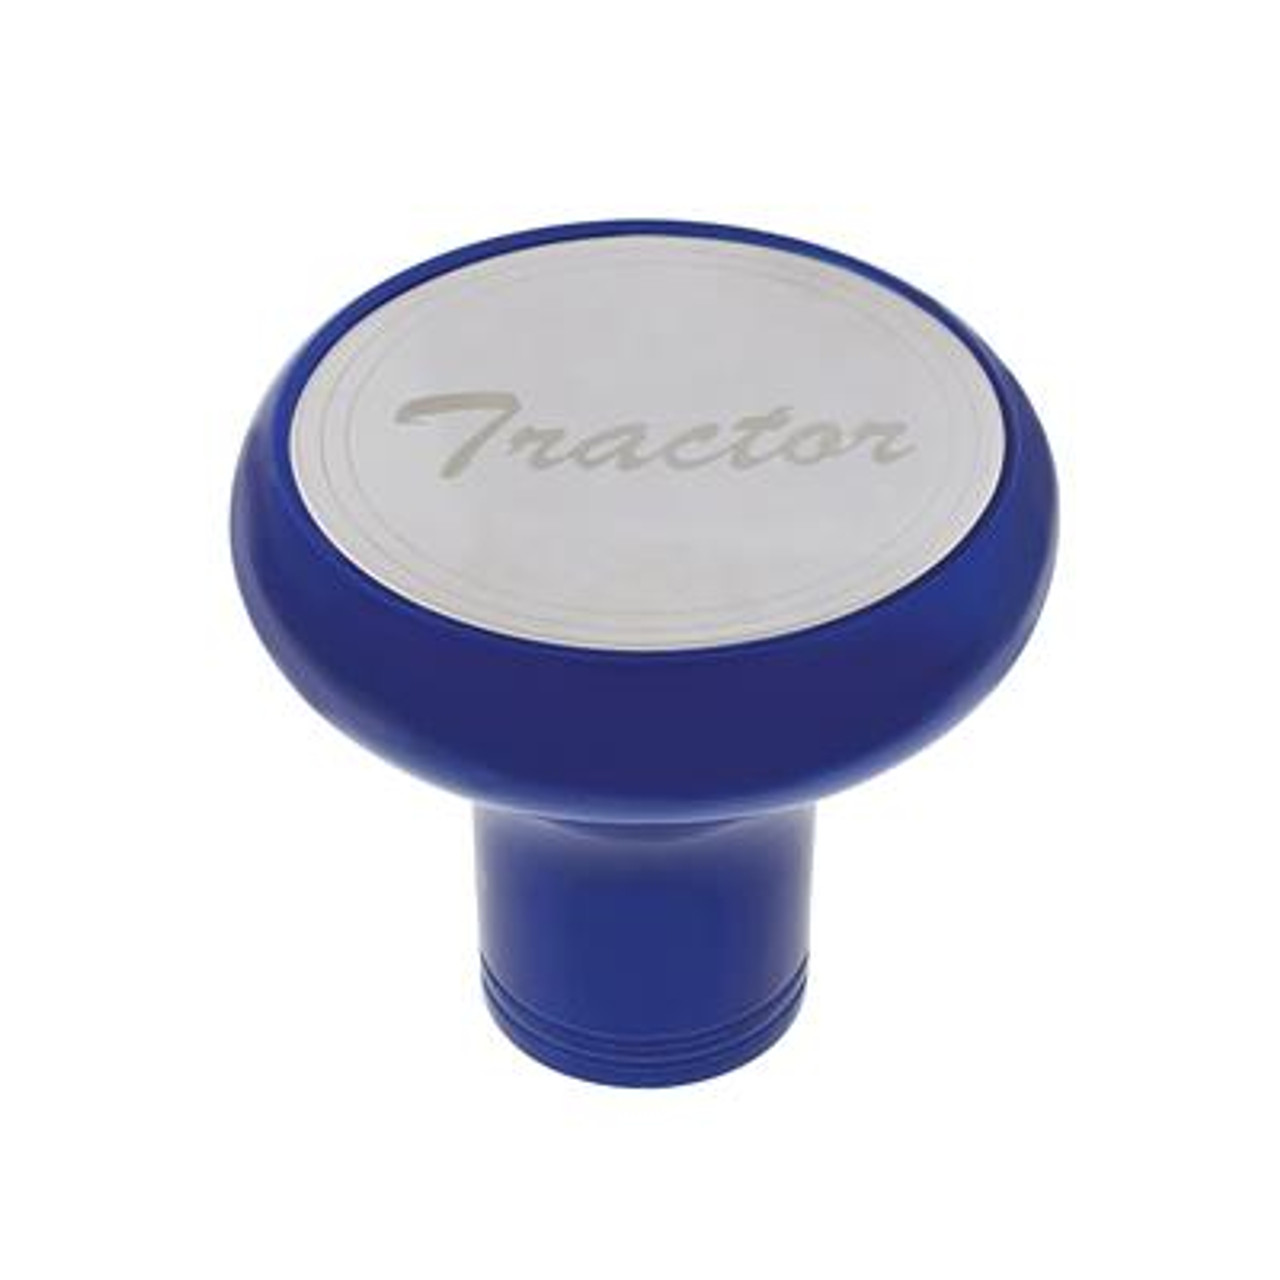 Coming in all shapes and sizes, our knobs even come with different labels such as “emergency”, “tractor”, and “trailer” to make sure you’re pulling on the right one. And the best part? Installation is as easy as screwing them in!